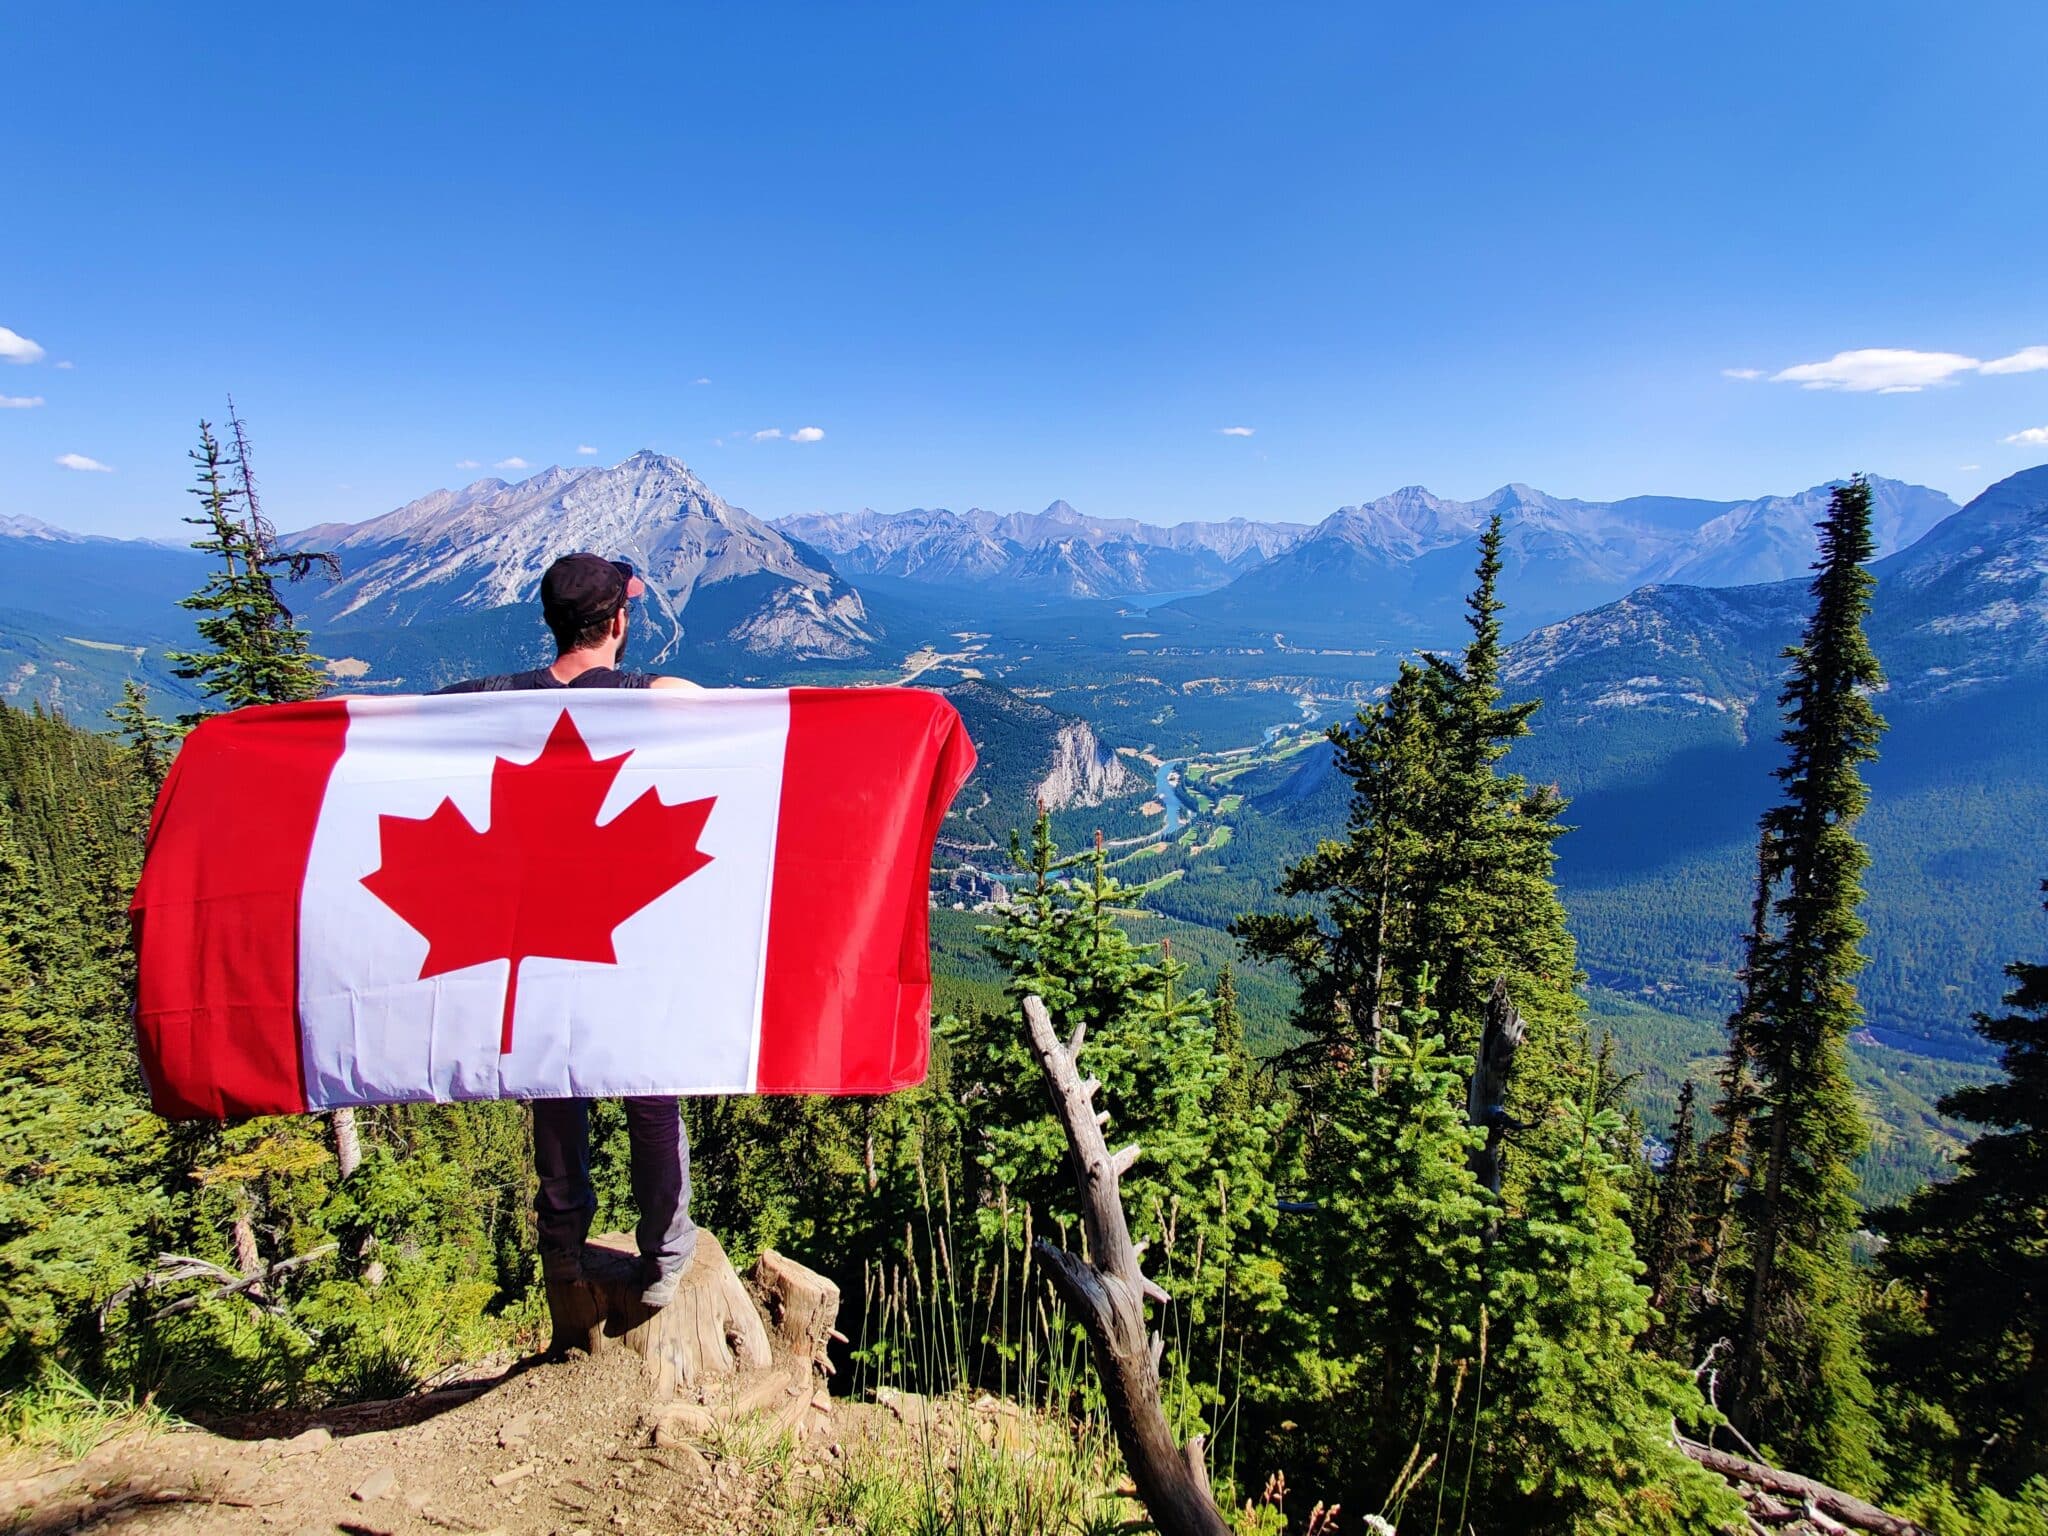 finance tips when moving to canada will prepare you like this man with a canadian flag on a mountain